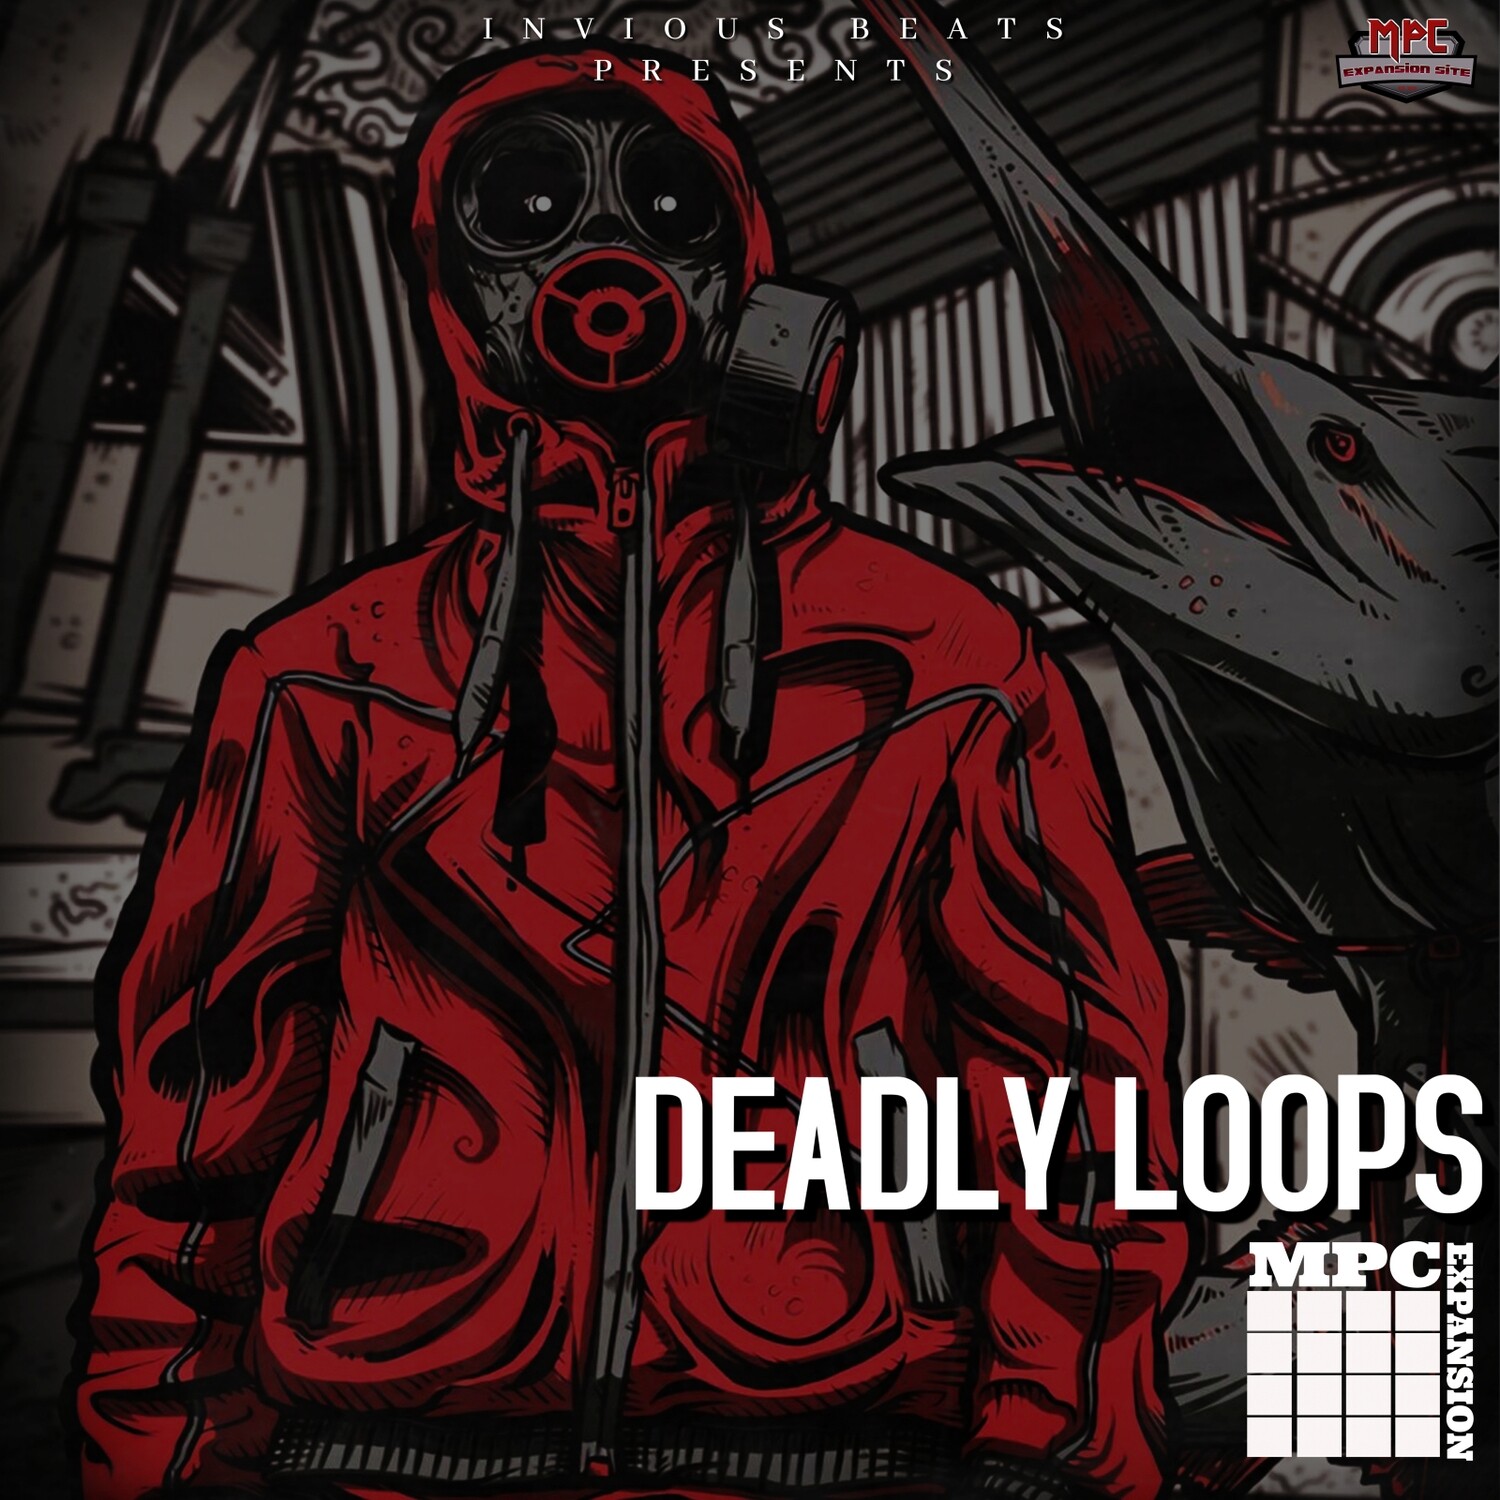 MPC EXPANSION 'DEADLY LOOPS' by INVIOUS